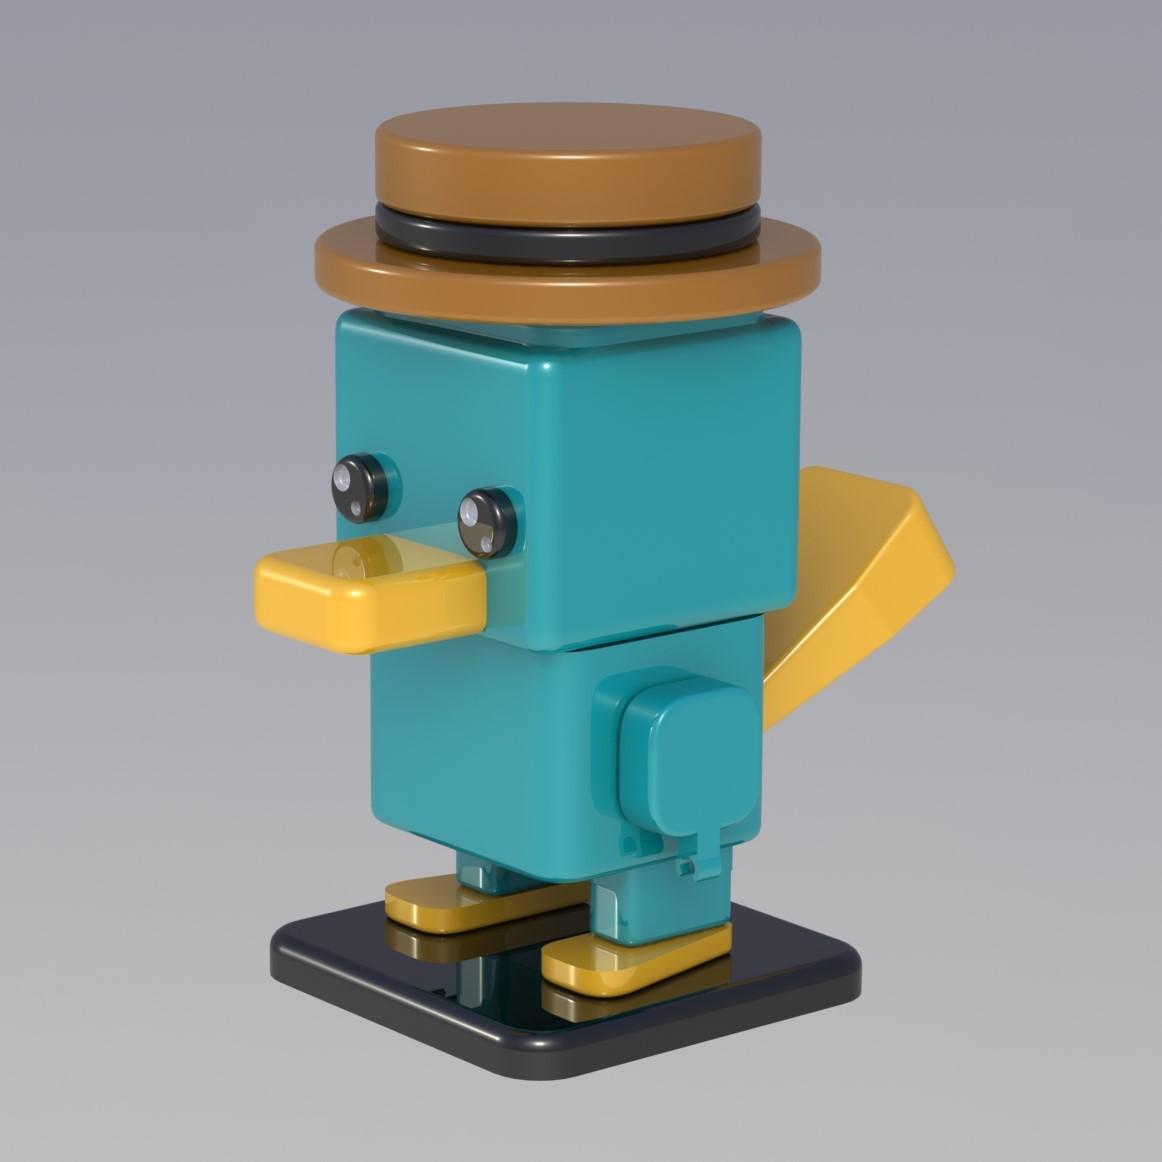 SQUARED PERRY THE PLATYPUS 3d model